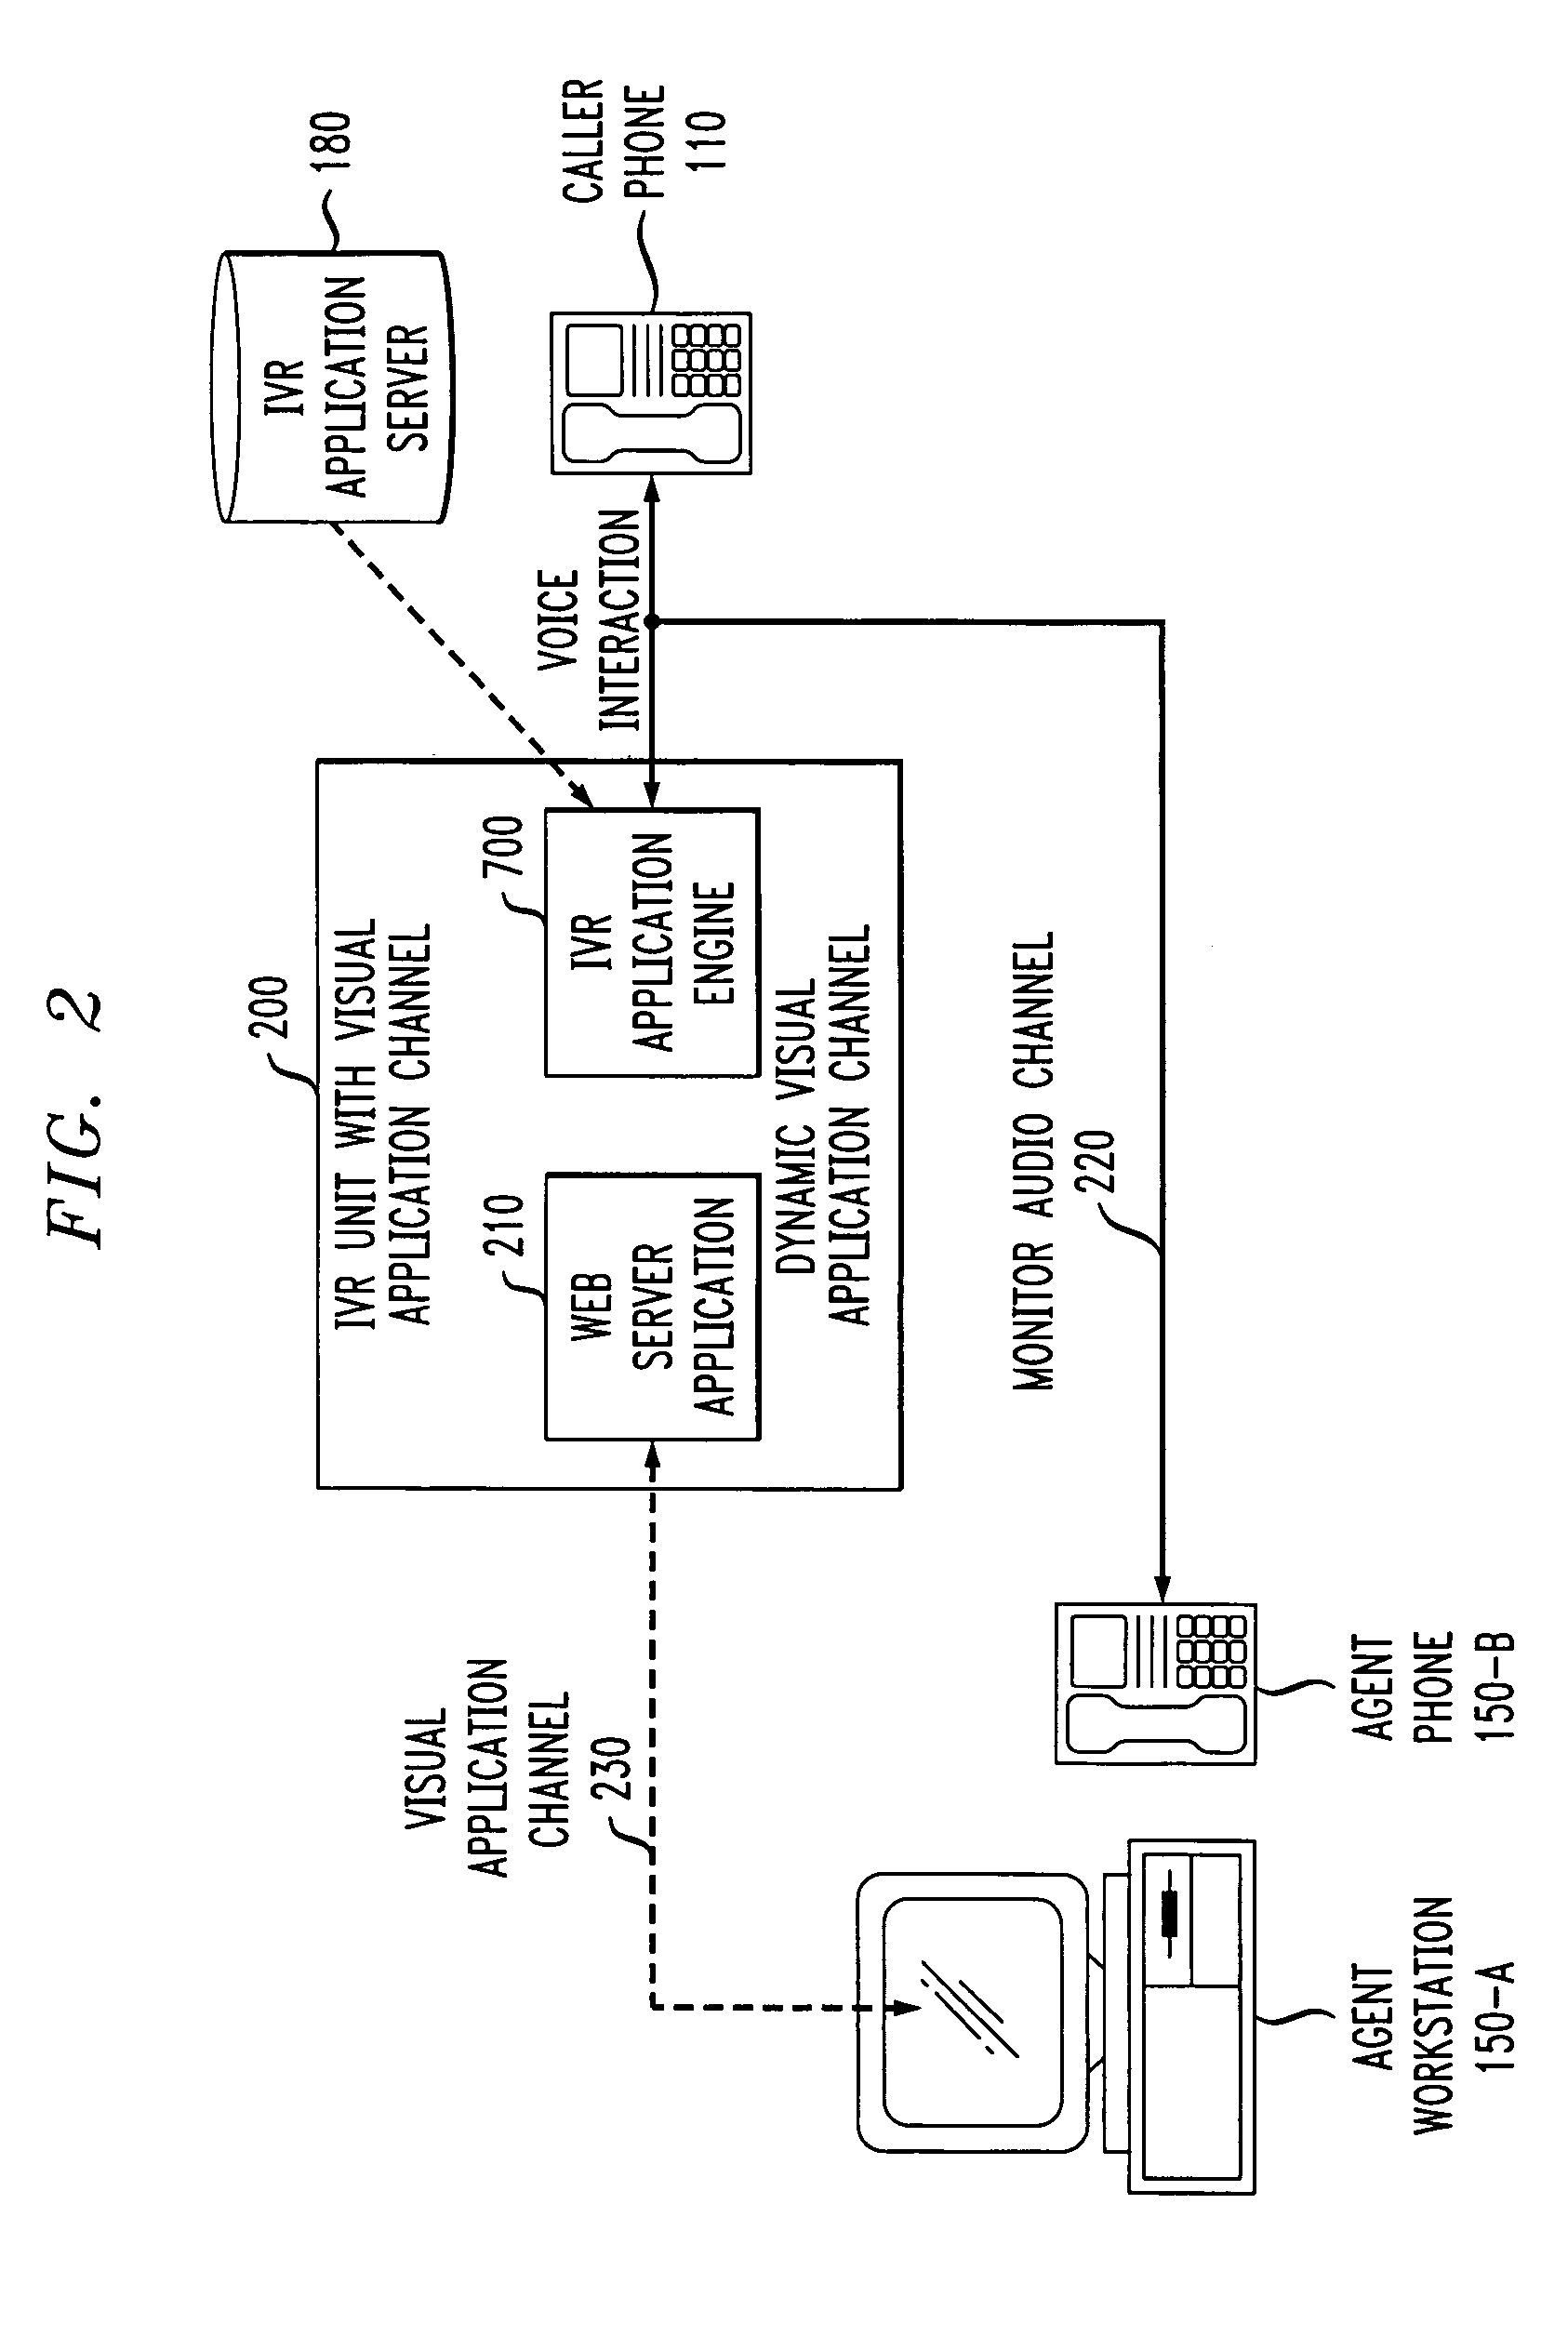 Method and apparatus for interactive voice processing with visual monitoring channel